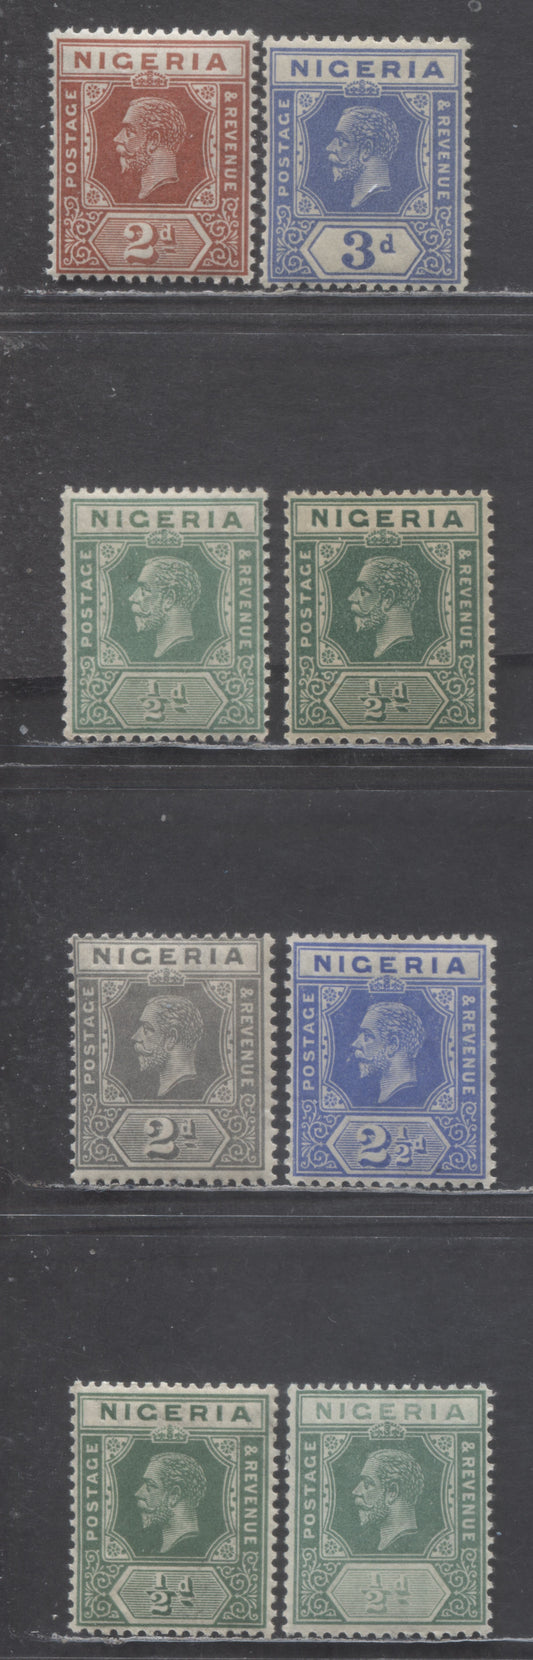 Nigeria SC#18/26 1921-1933 King George V Imperium Keyplates, Die 1 & 2, Script CA Wmk, 8 F/VFNH Singles, Click on Listing to See ALL Pictures, Estimated Value $50